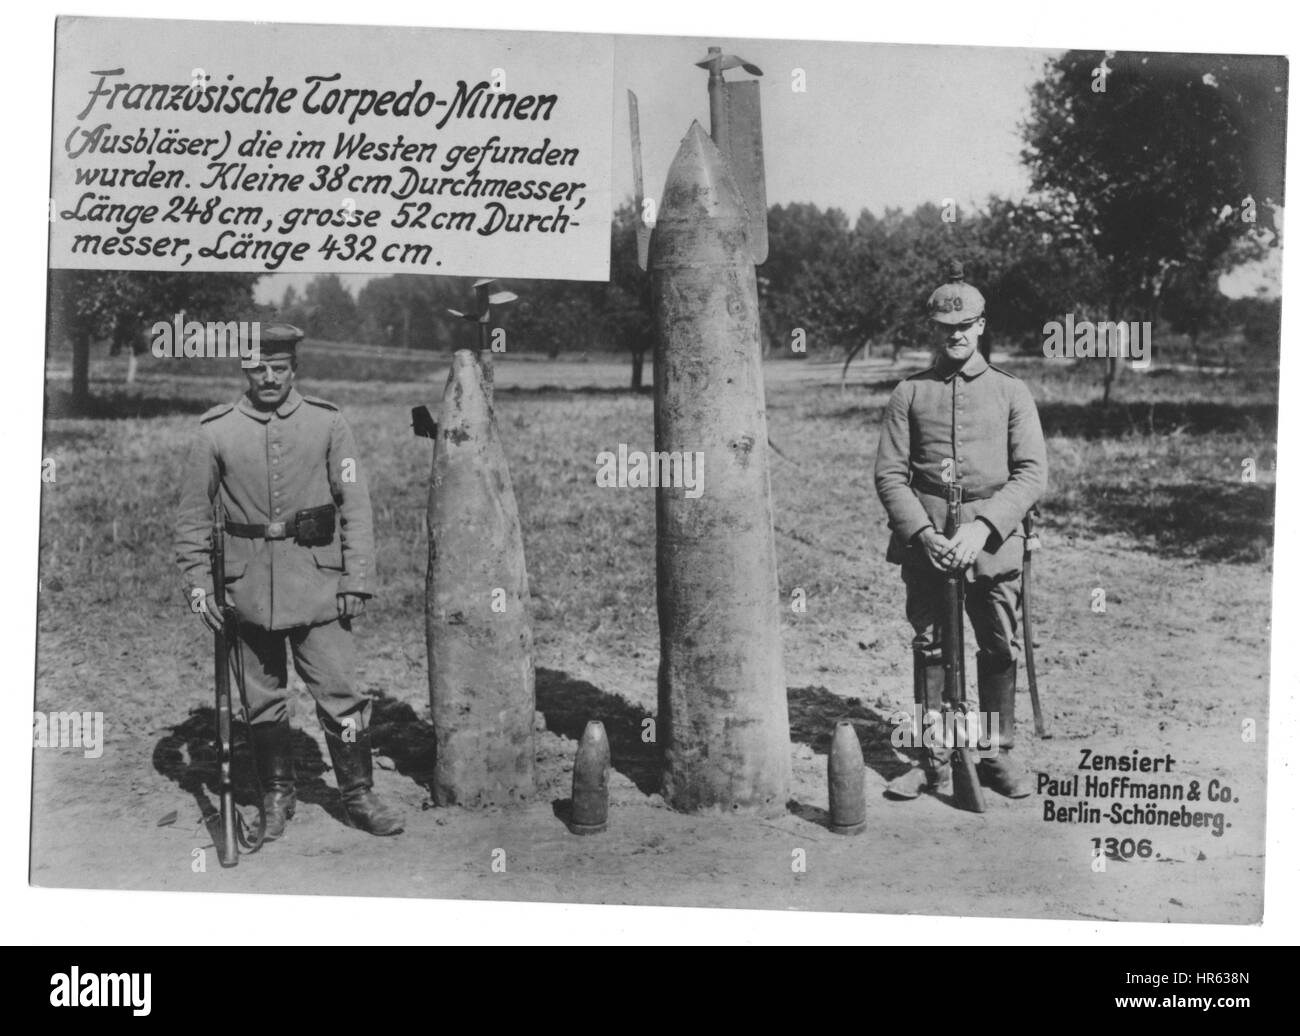 French torpedos found and confiscated by the German army on the western front during World War I, 1915. From the New York Public Library. Stock Photo